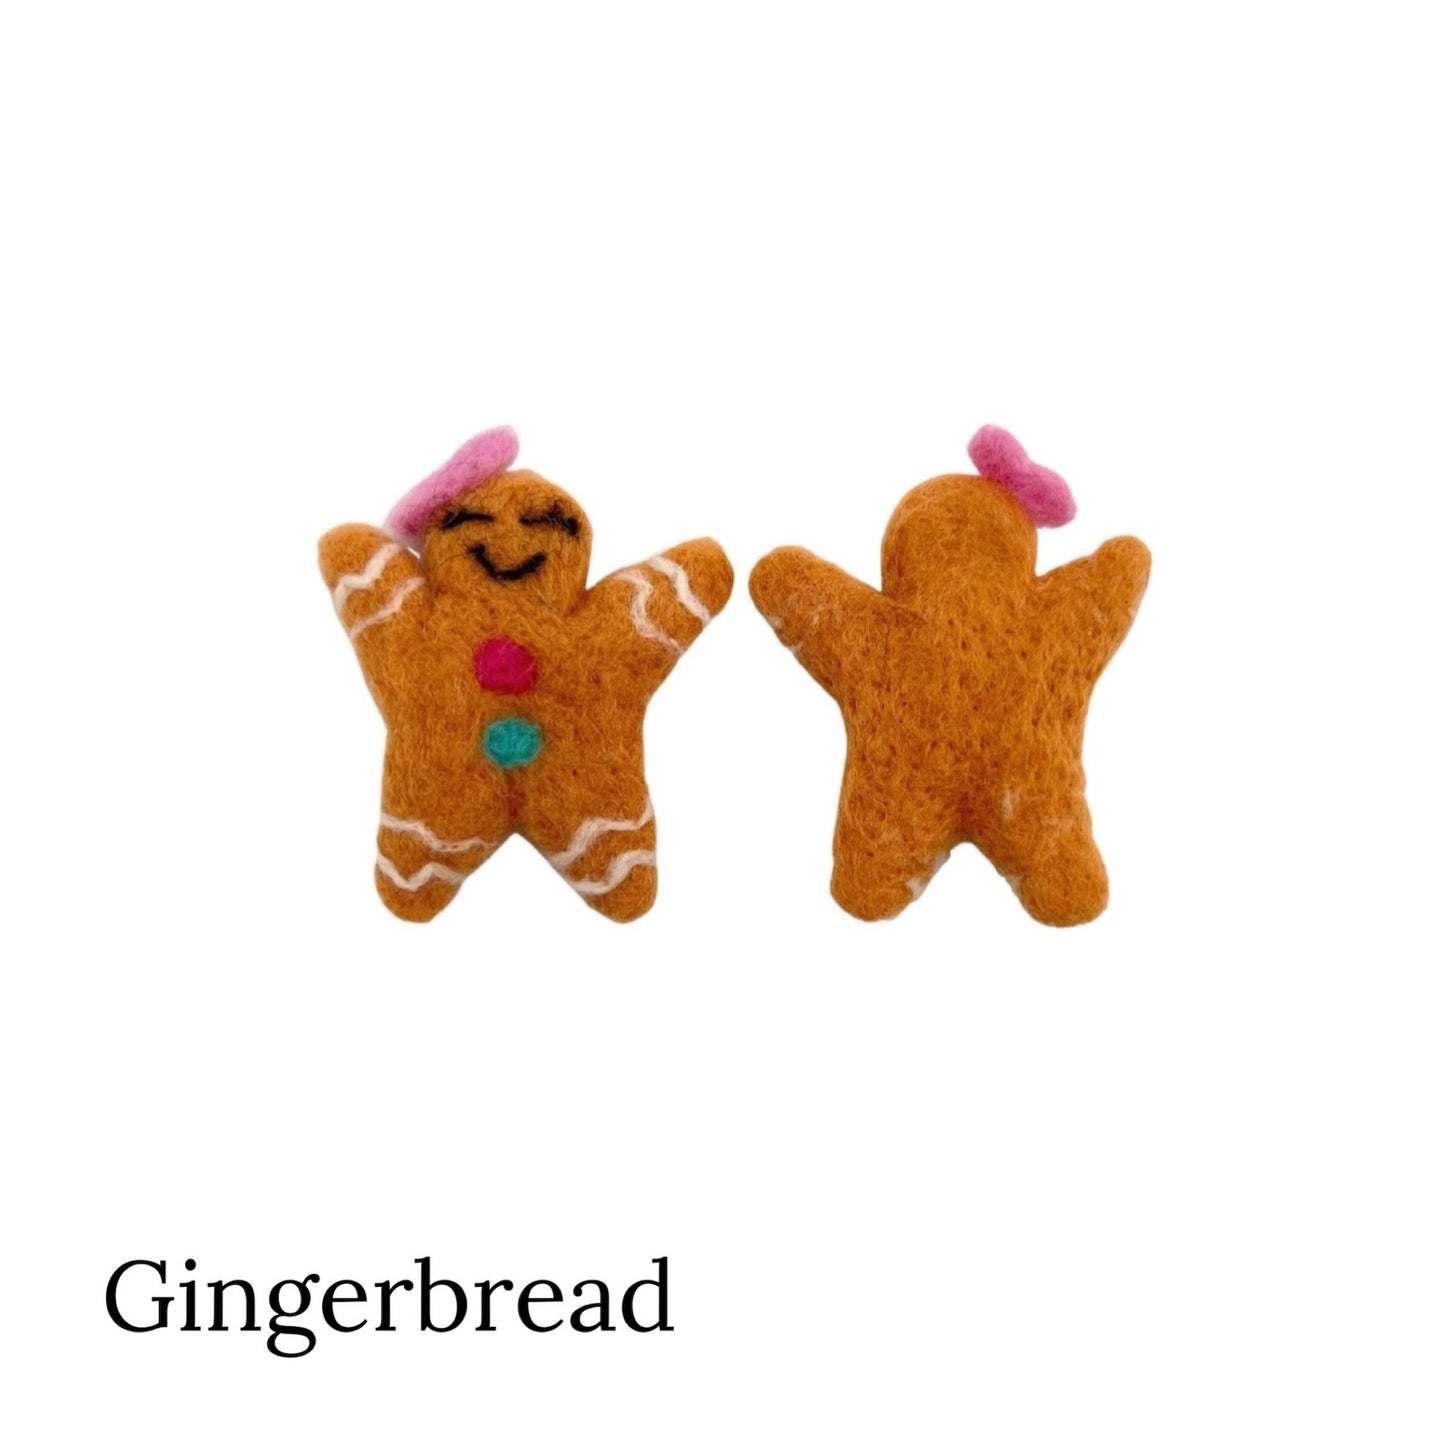 Gingerbread with pink bow needle felt front and back.